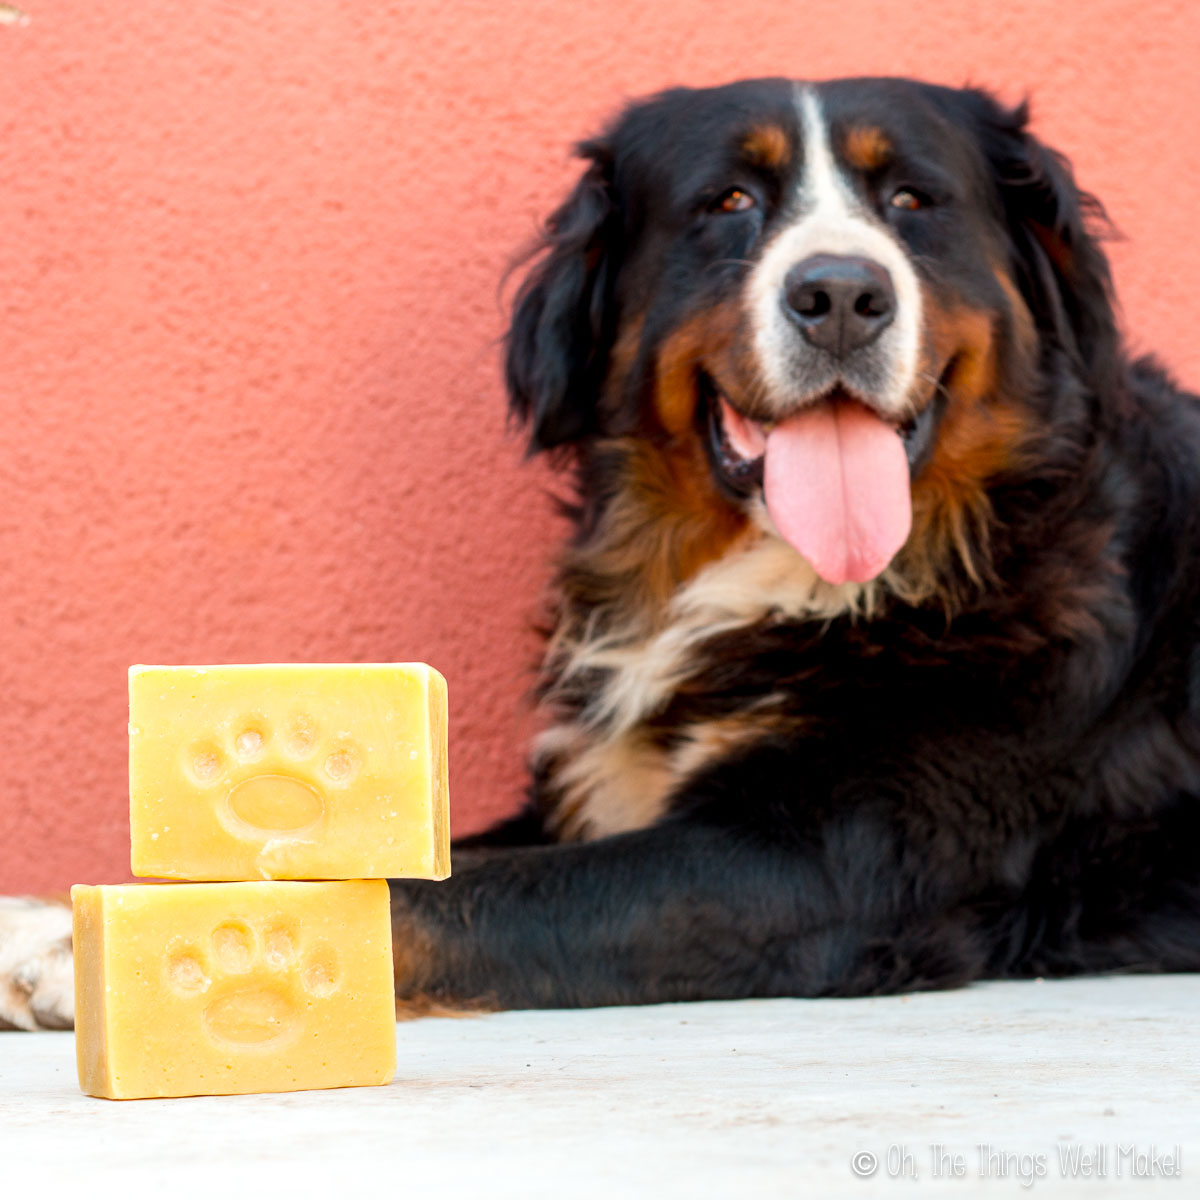 Bernese mountain dog lying beside stack of three paw print-shaped soaps on a red background.